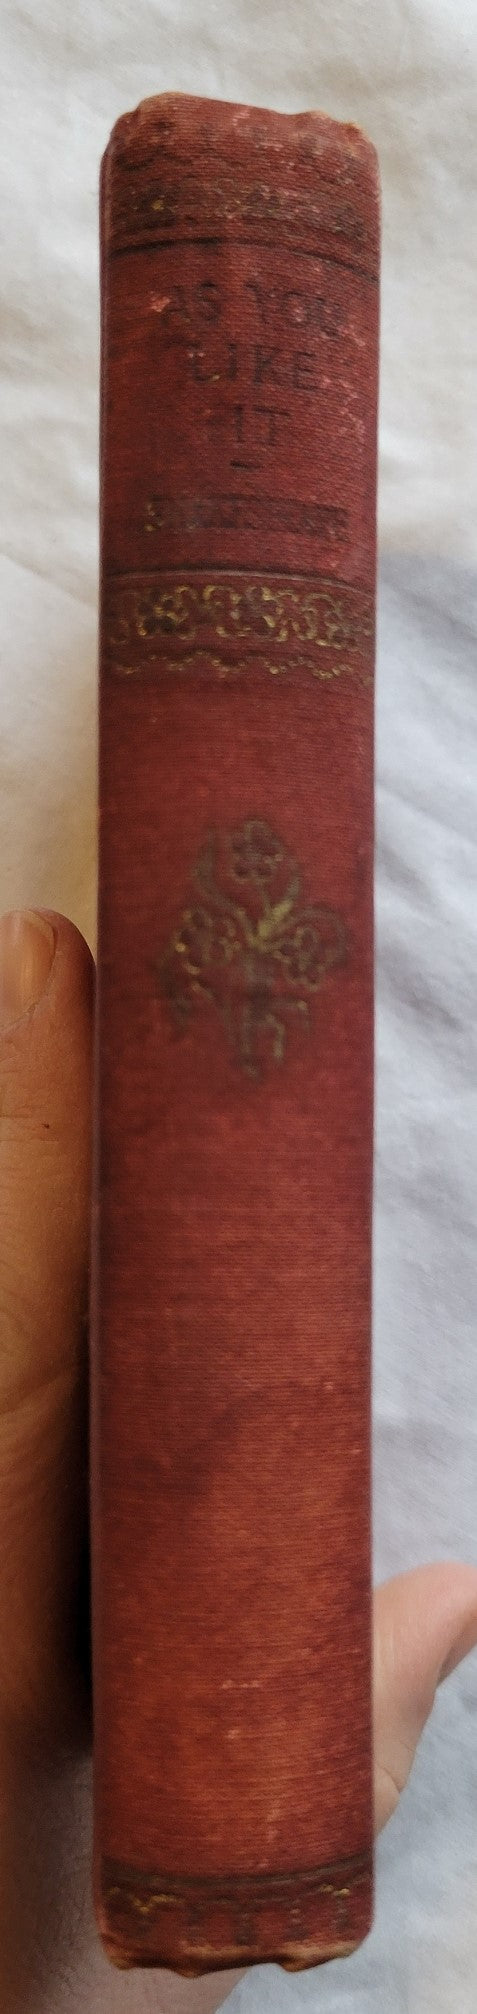 "As You Like It" by William Shakespeare, published by E. A. Lawson Company Publishers, printing date unknown but believed to be around the late 1800s.  View of spine.